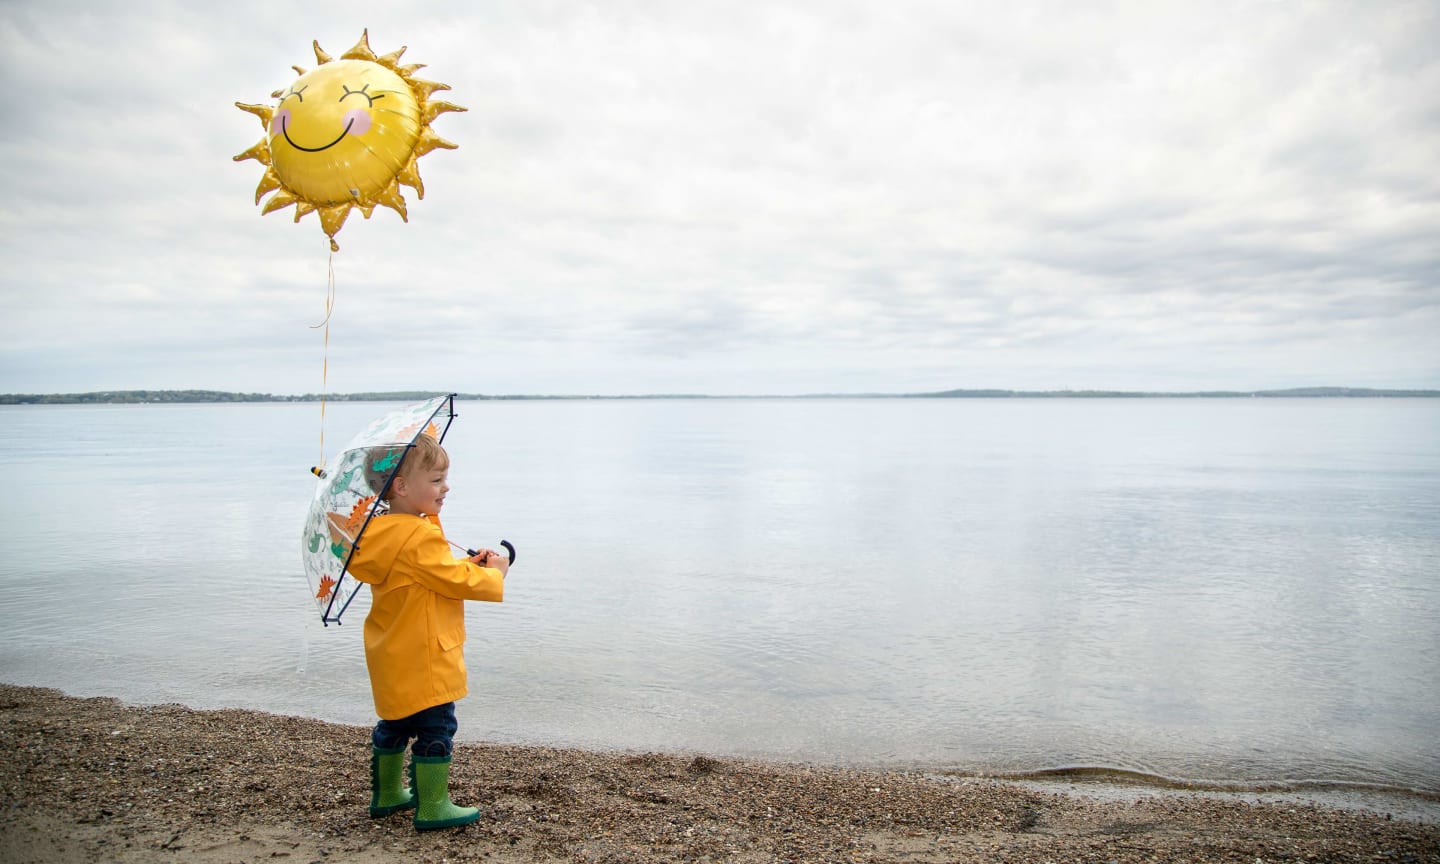 Rykal Wasson standing on the shore of a lake, wearing rain coat, holding a balloon